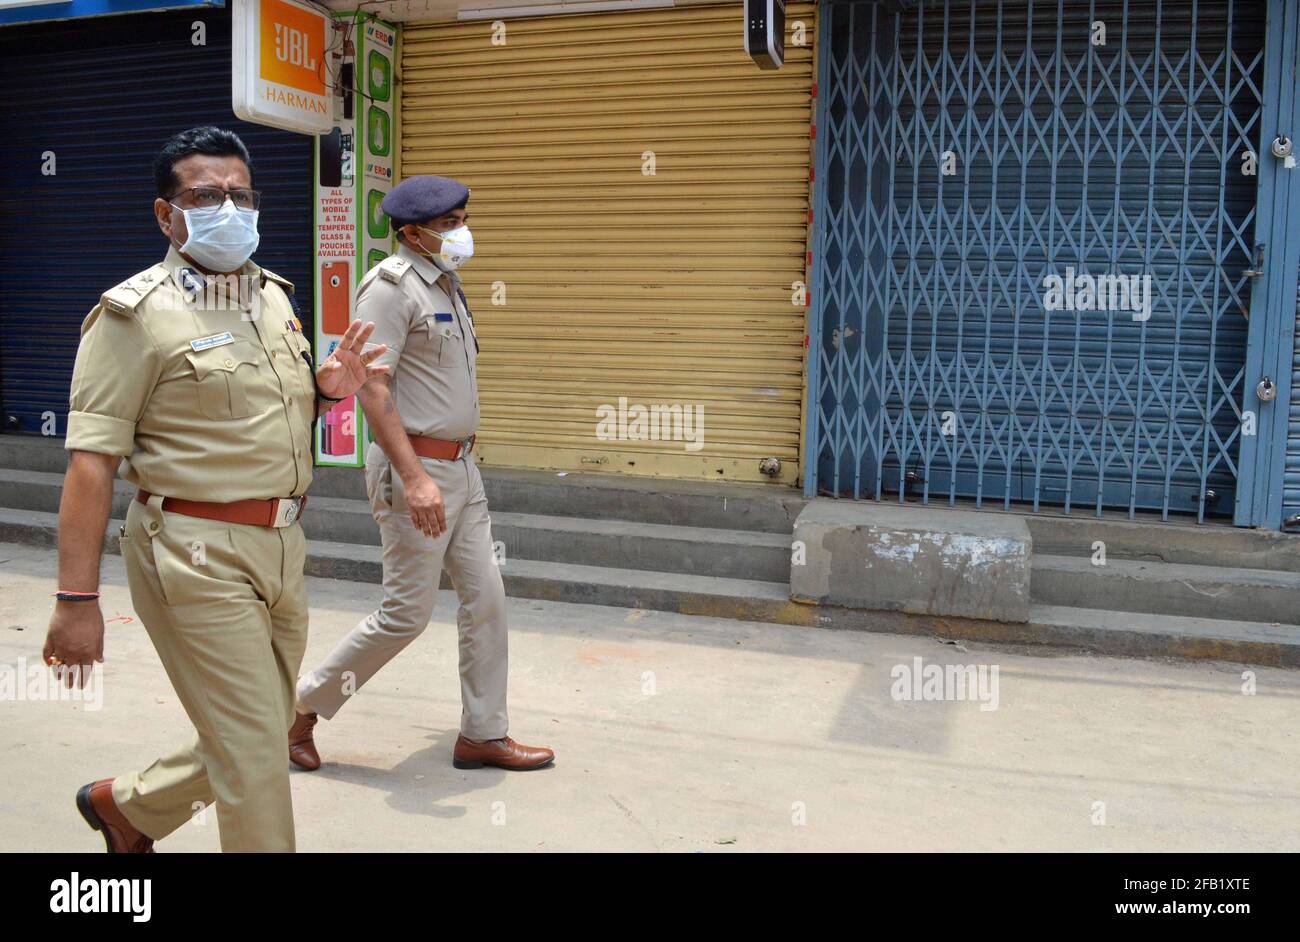 Bangalore, India. 23rd Apr, 2021. Police shut down commercial and non essential shops as new COVID-19 restrictions are imposed to curtail the rapidly spiraling chain of coronavirus infections, in Bangalore, India, April 23, 2021. Credit: Str/Xinhua/Alamy Live News Stock Photo